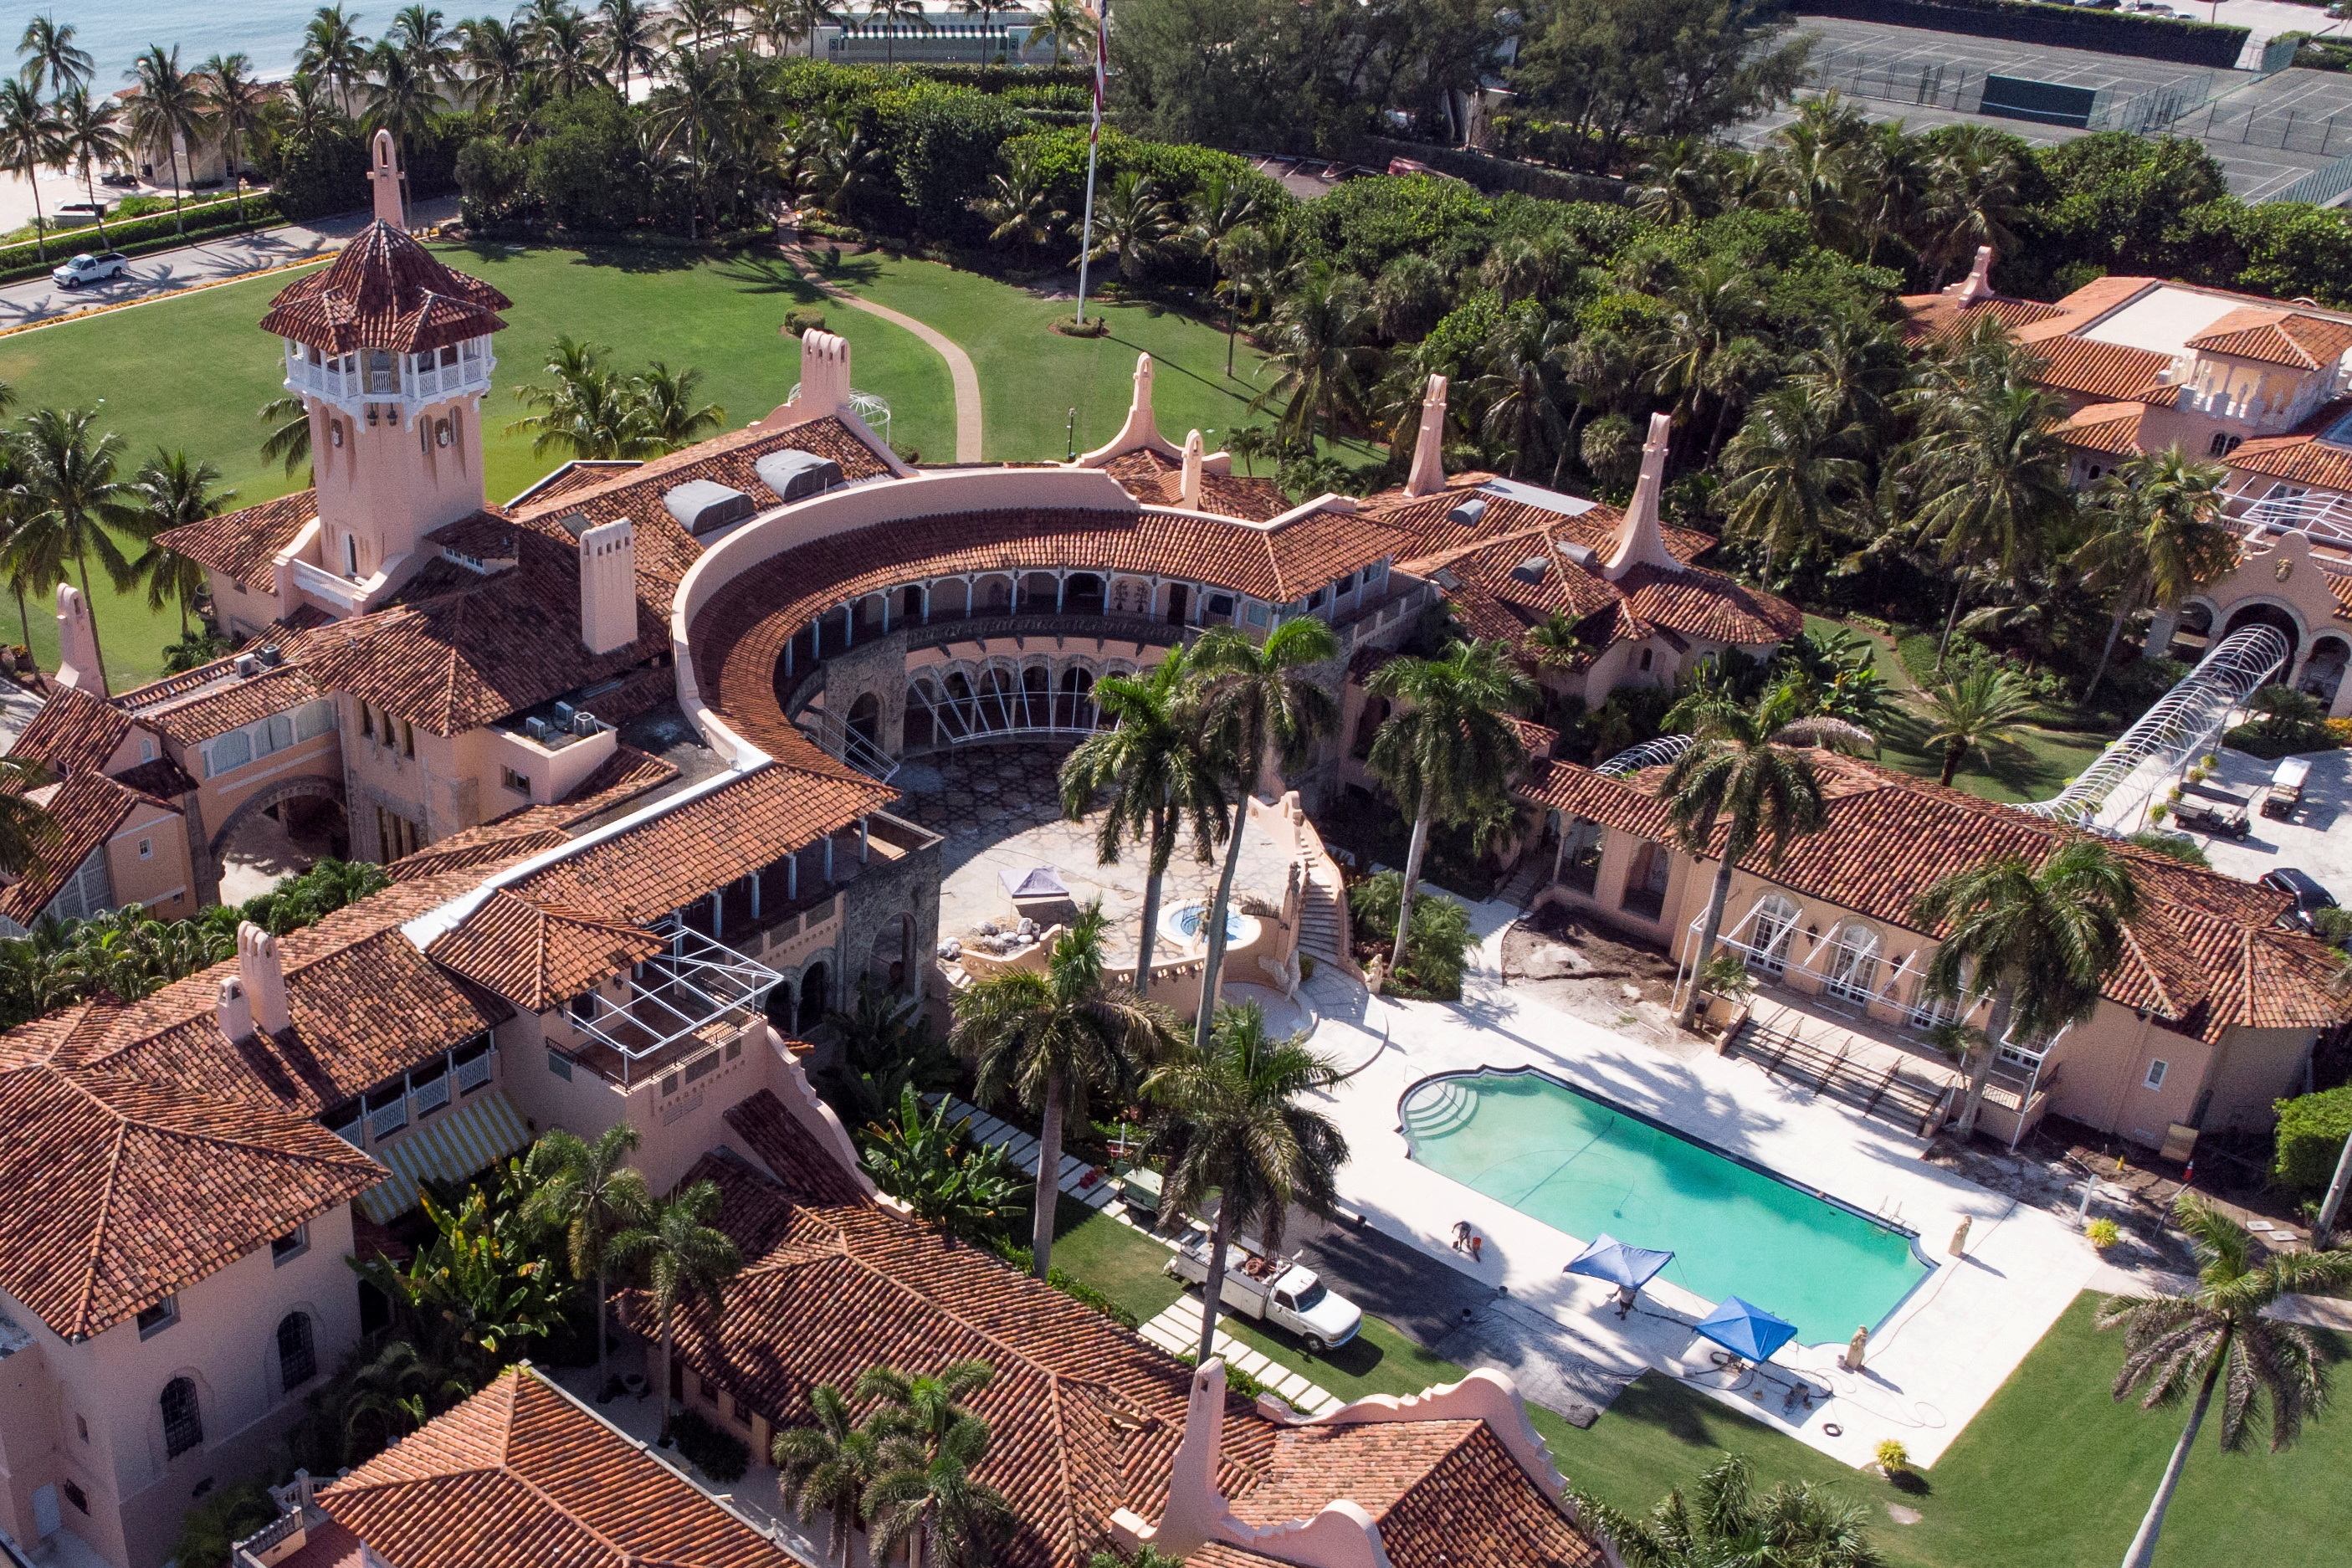 The document notes that the raid on Mar-a-Lago was necessary because of the highly classified material in those 15 boxes.  Of the 184 classified documents, 25 were classified as top secret.  Some of the files had special markings indicating that they contained information from highly sensitive human sources or electronic devices authorized by the Special Intelligence Court. 